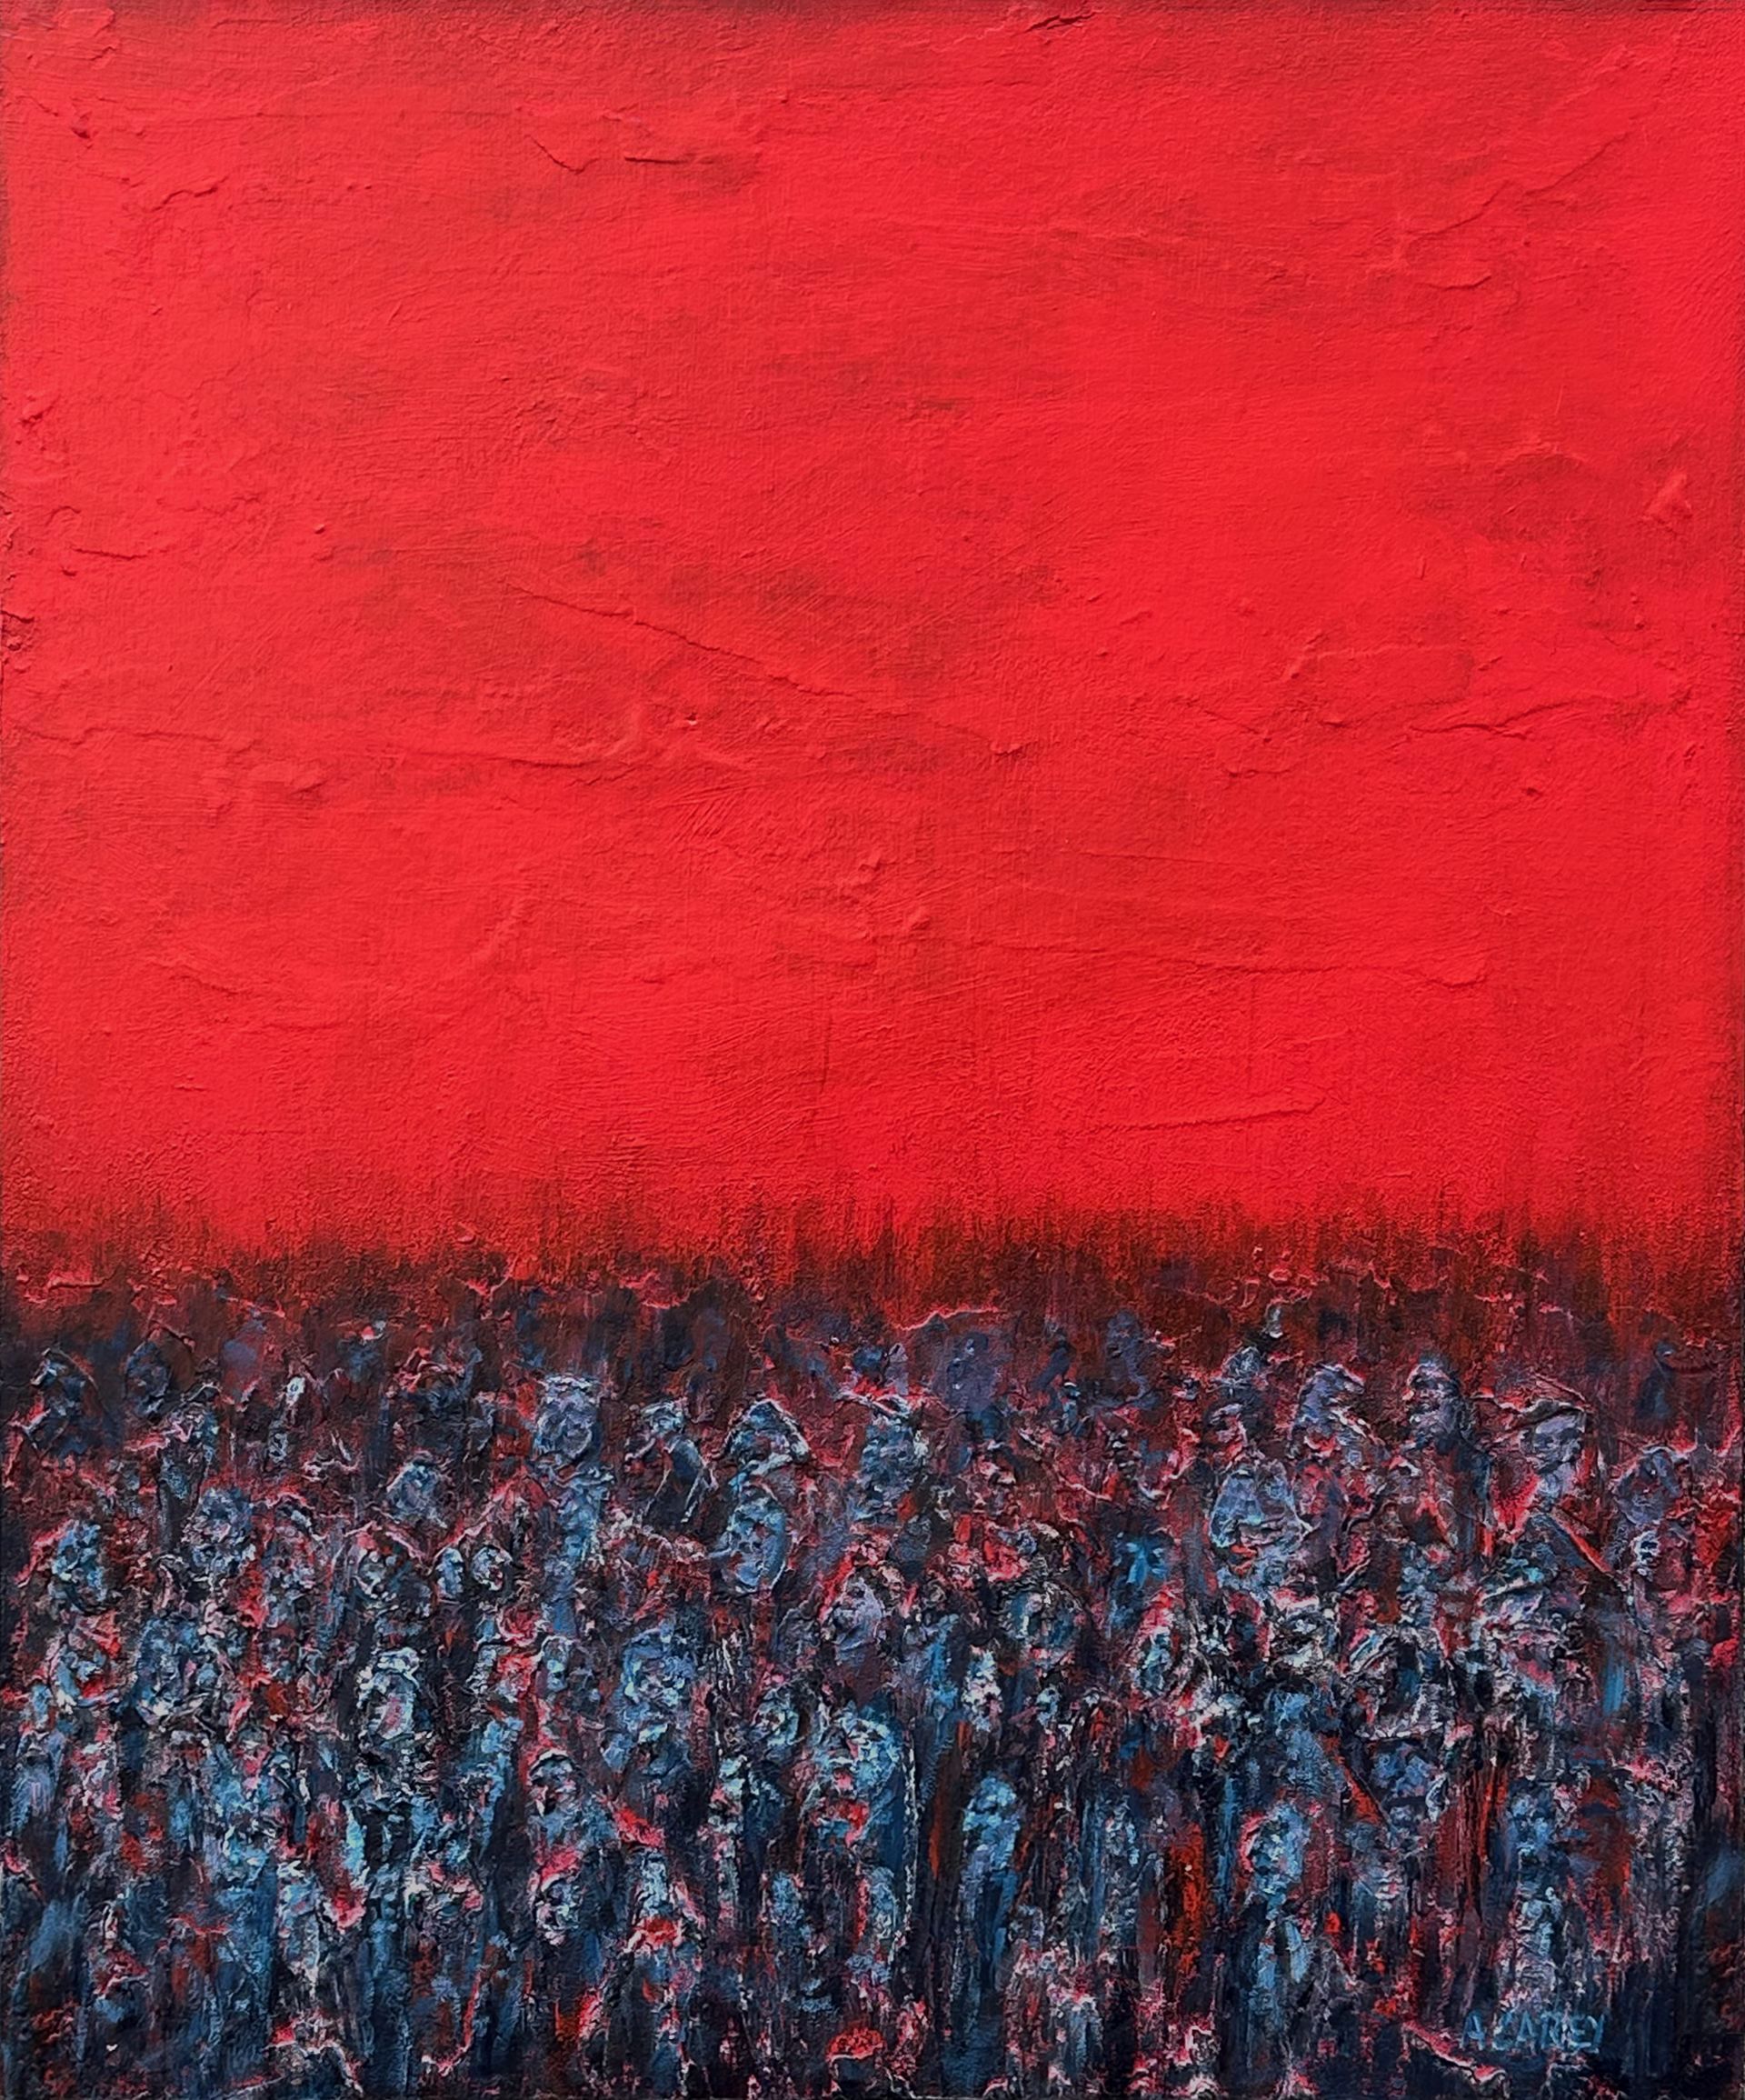 Painting showing abstracted figurative elements in dark blue and white set against a red sky. A closer inspection reveals a multitude of faces in the figures